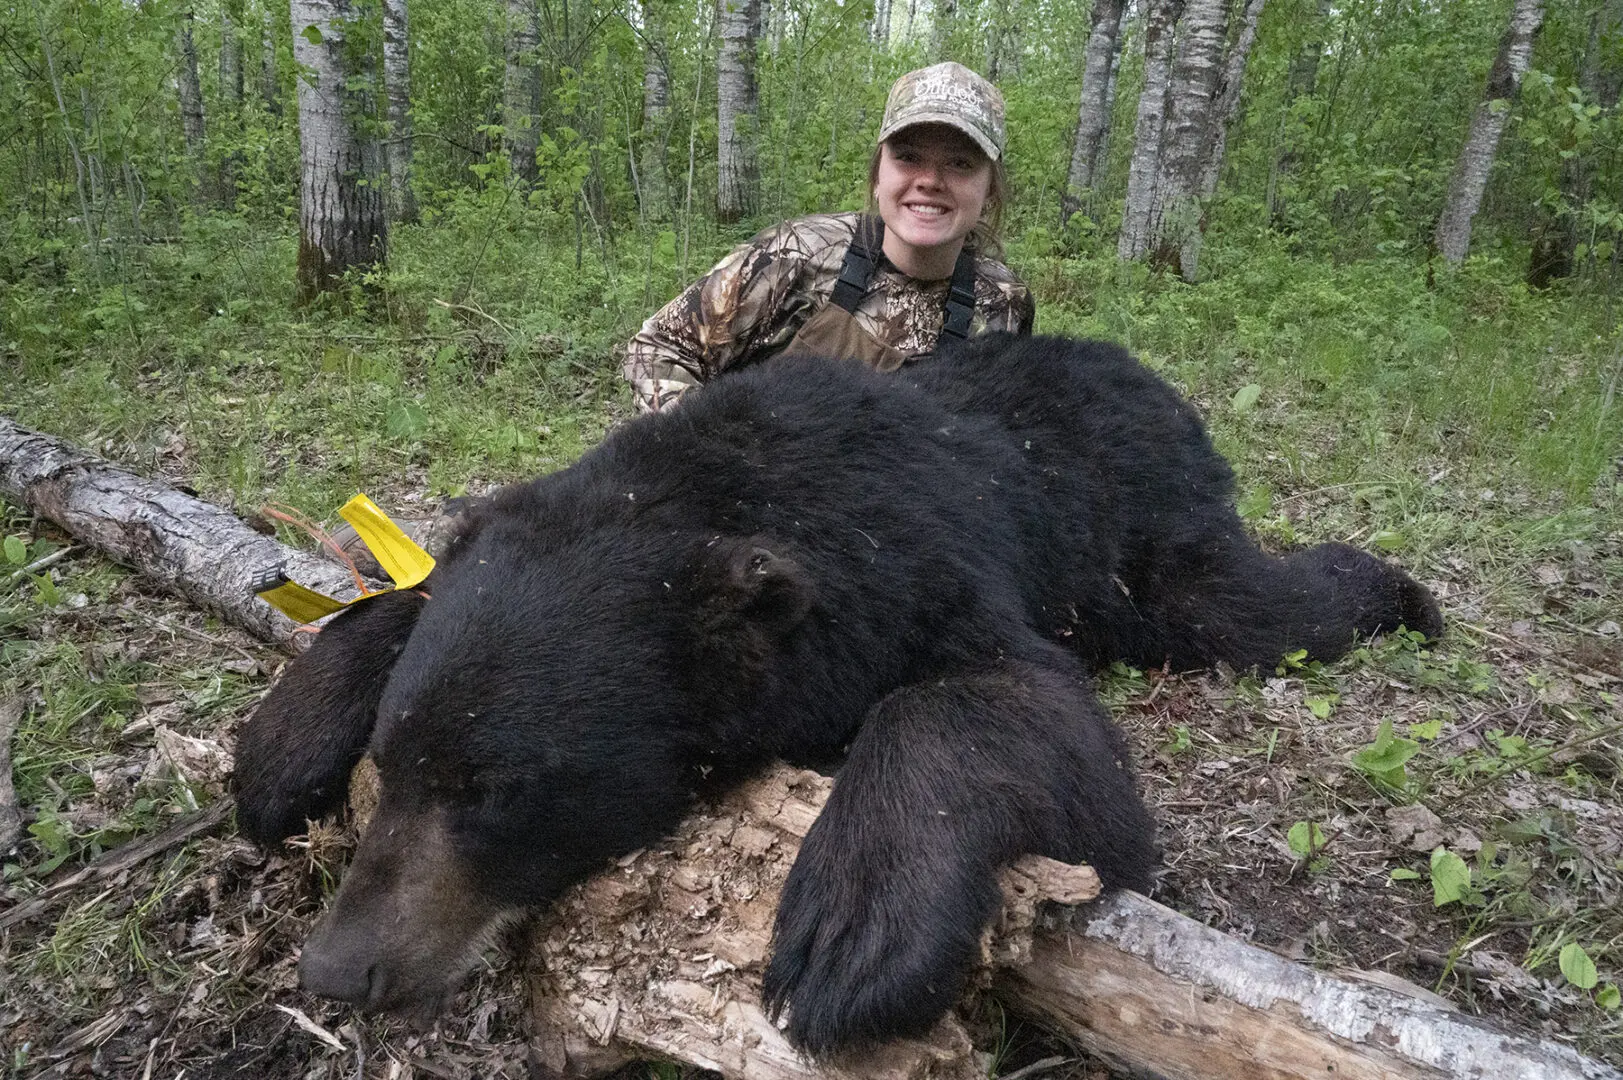 A woman in camouflage holding onto a bear